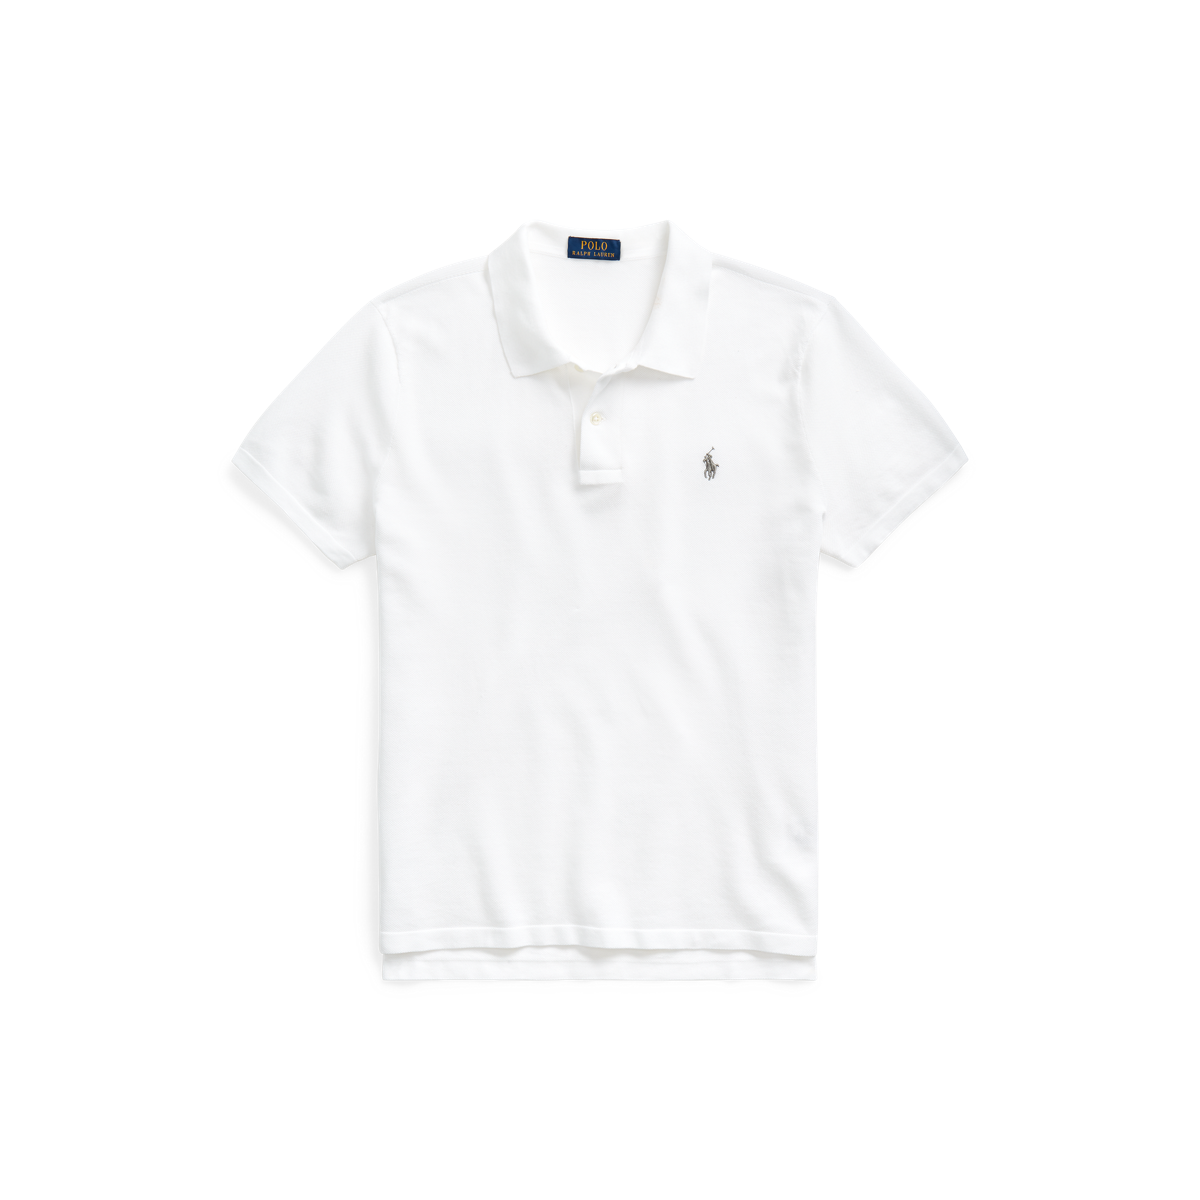 The Luxe Knit Polo Shirt